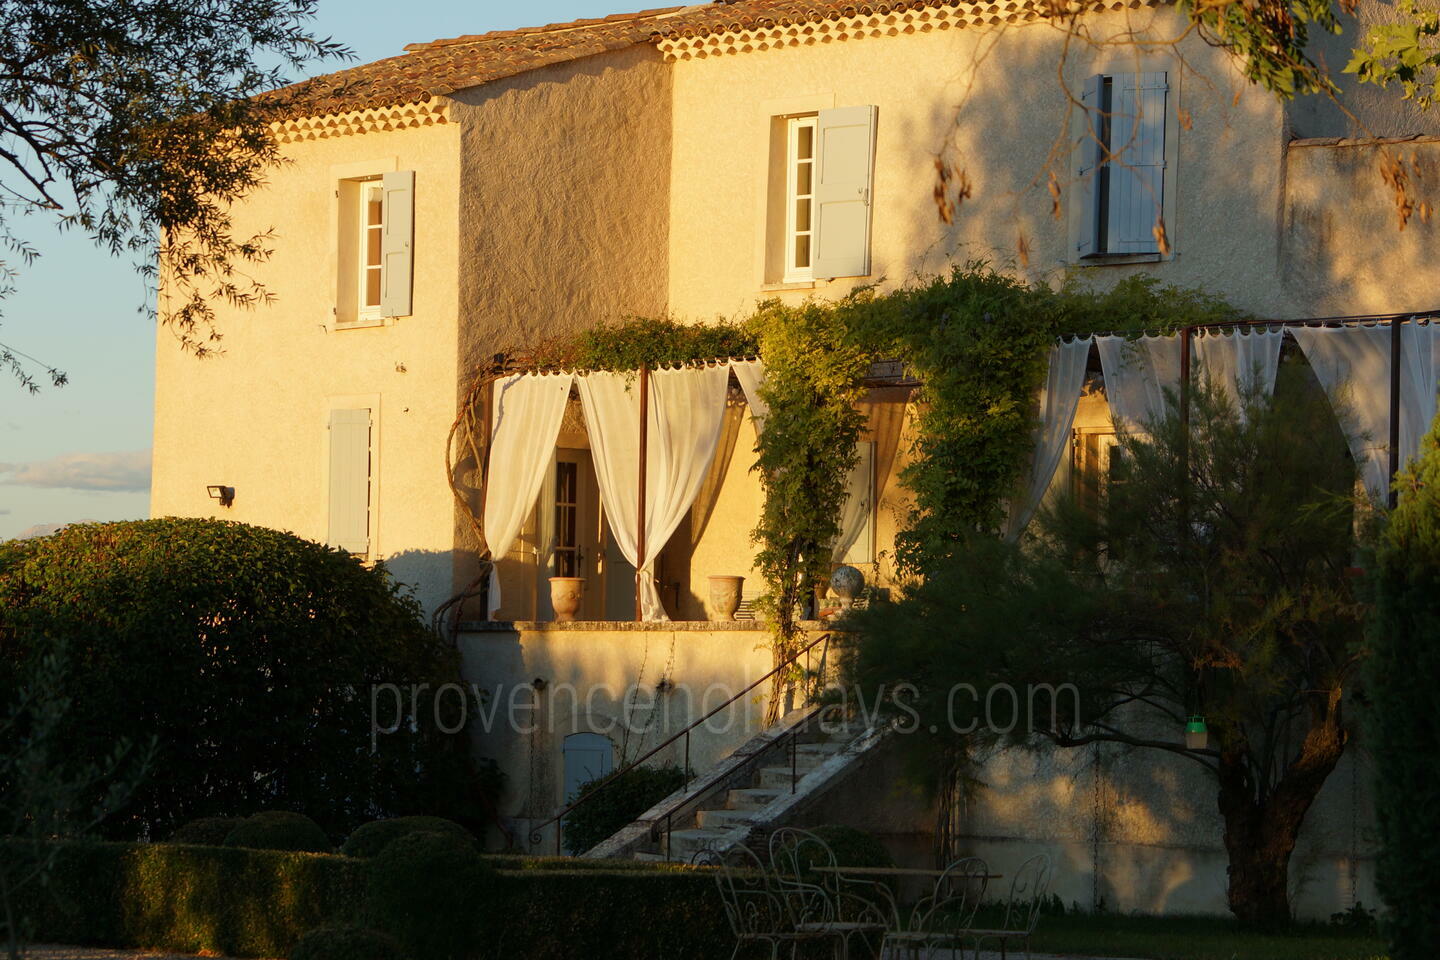 Beautiful Property For Sale in Provence Beautiful Property For Sale in Provence - -1